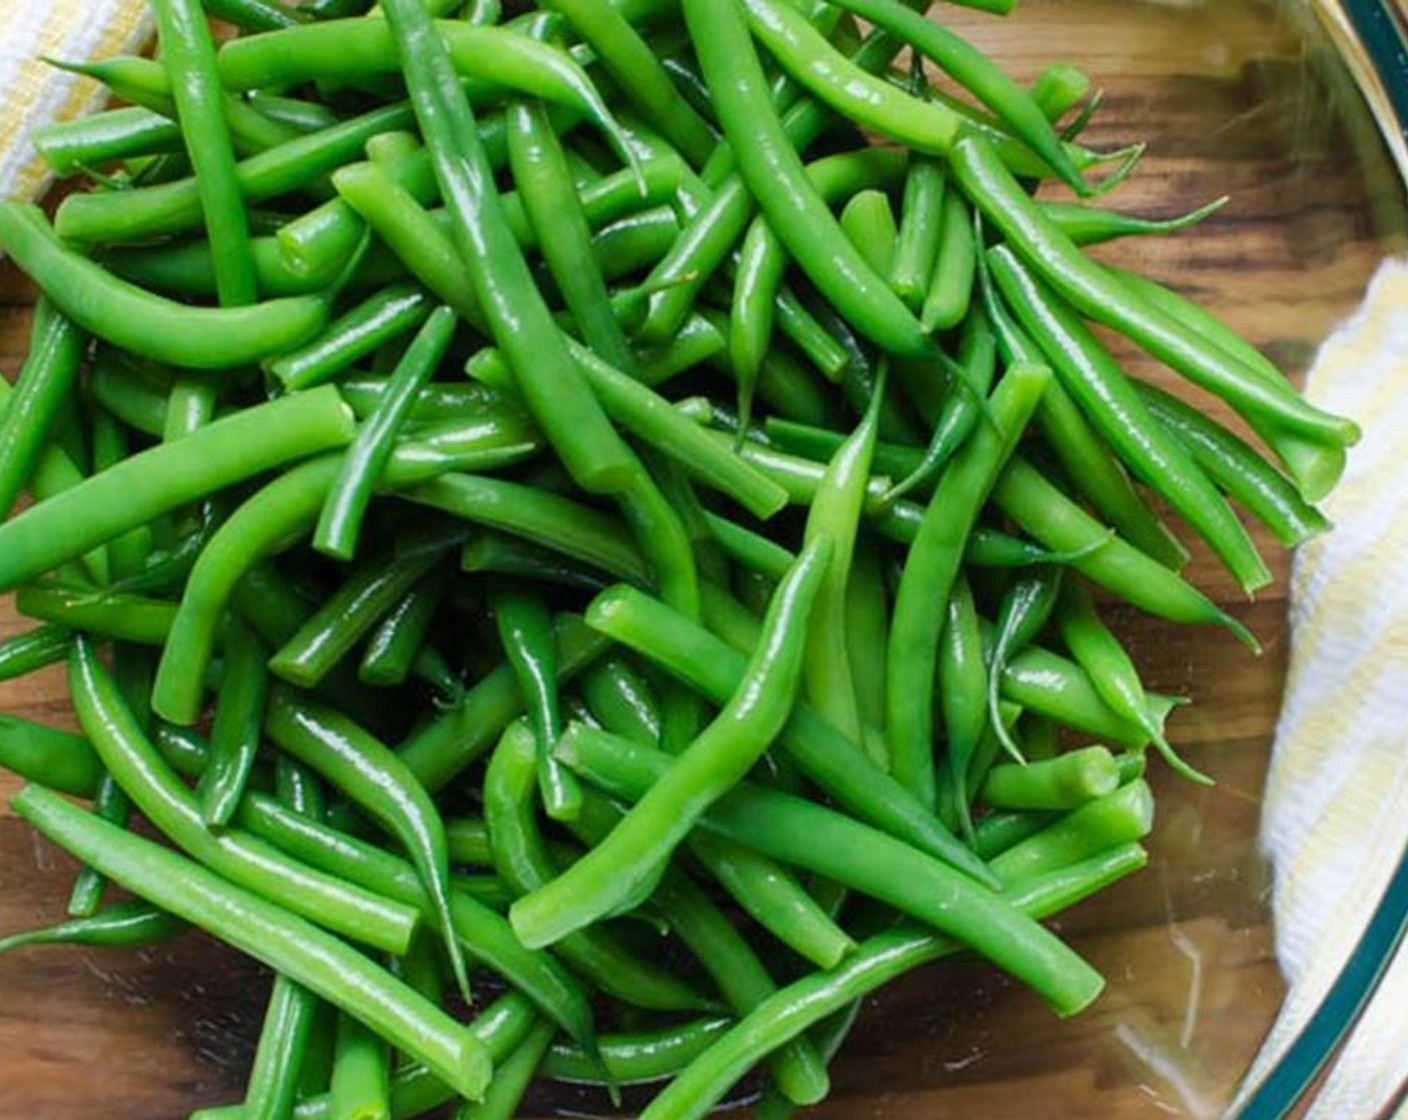 step 4 Using a slotted spoon or spider, transfer the green beans to the ice bath. When the beans are cold, drain off the water and pat the beans dry with paper towels. Transfer the beans to a large bowl.